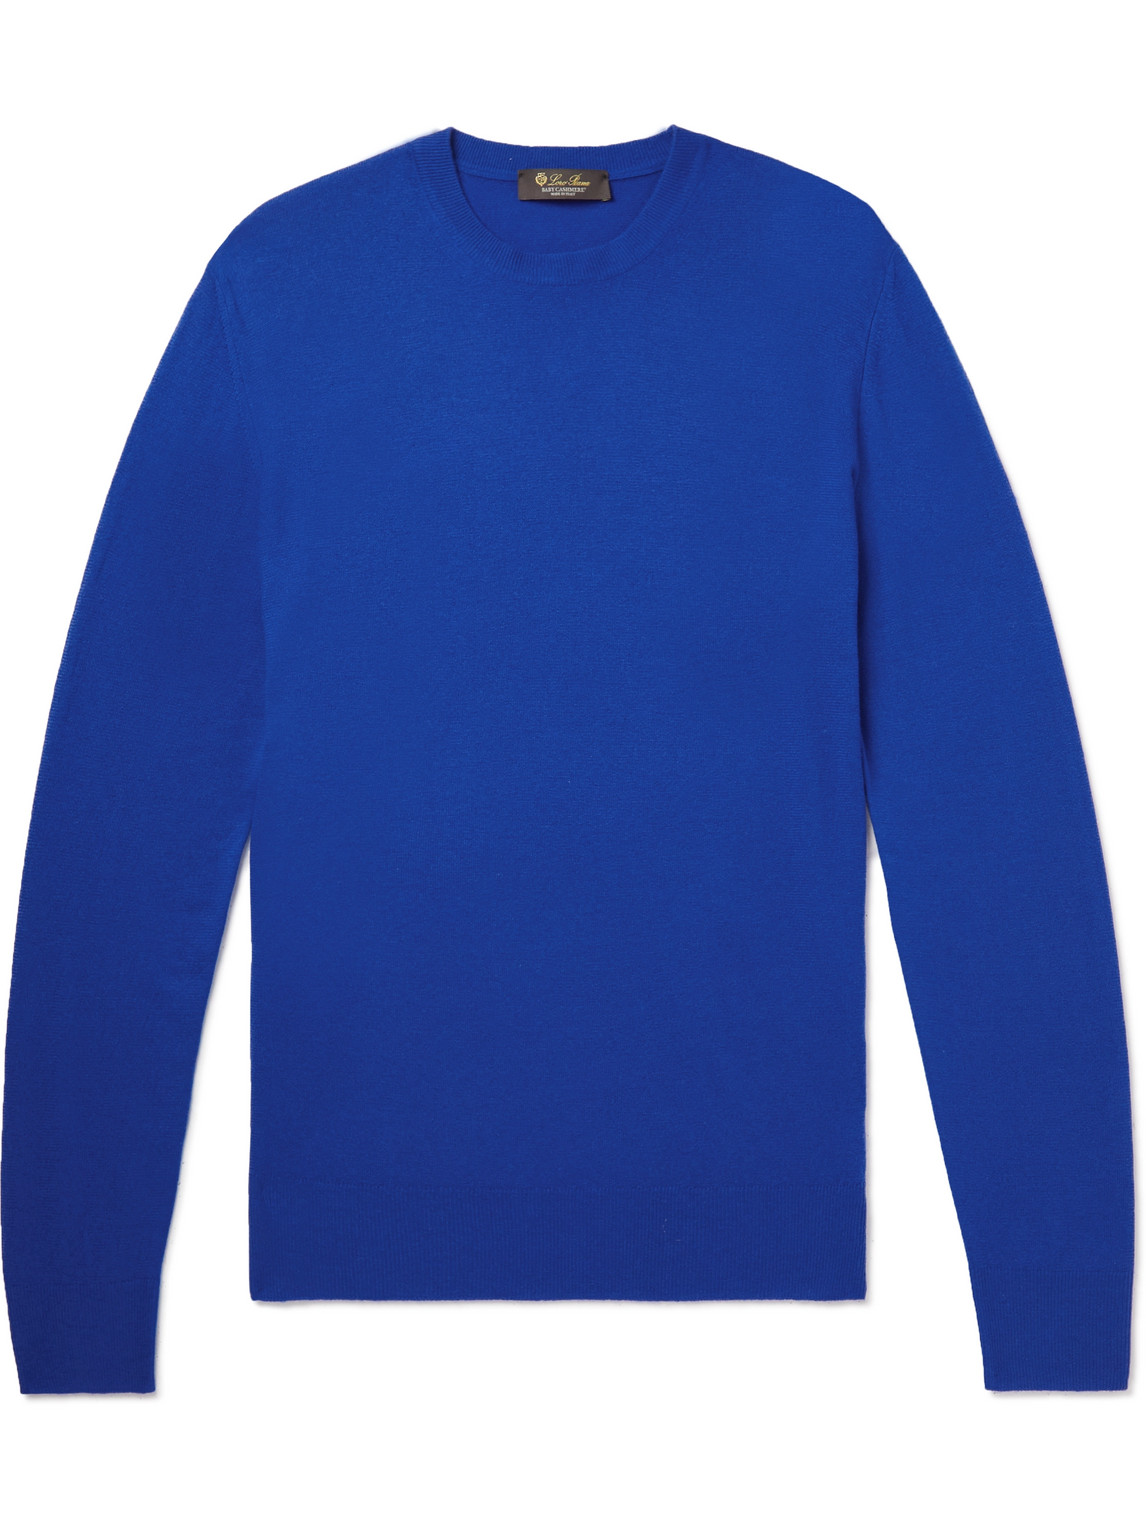 Loro Piana Baby Cashmere Superlight Dyed Crewneck In W0rm Aouli